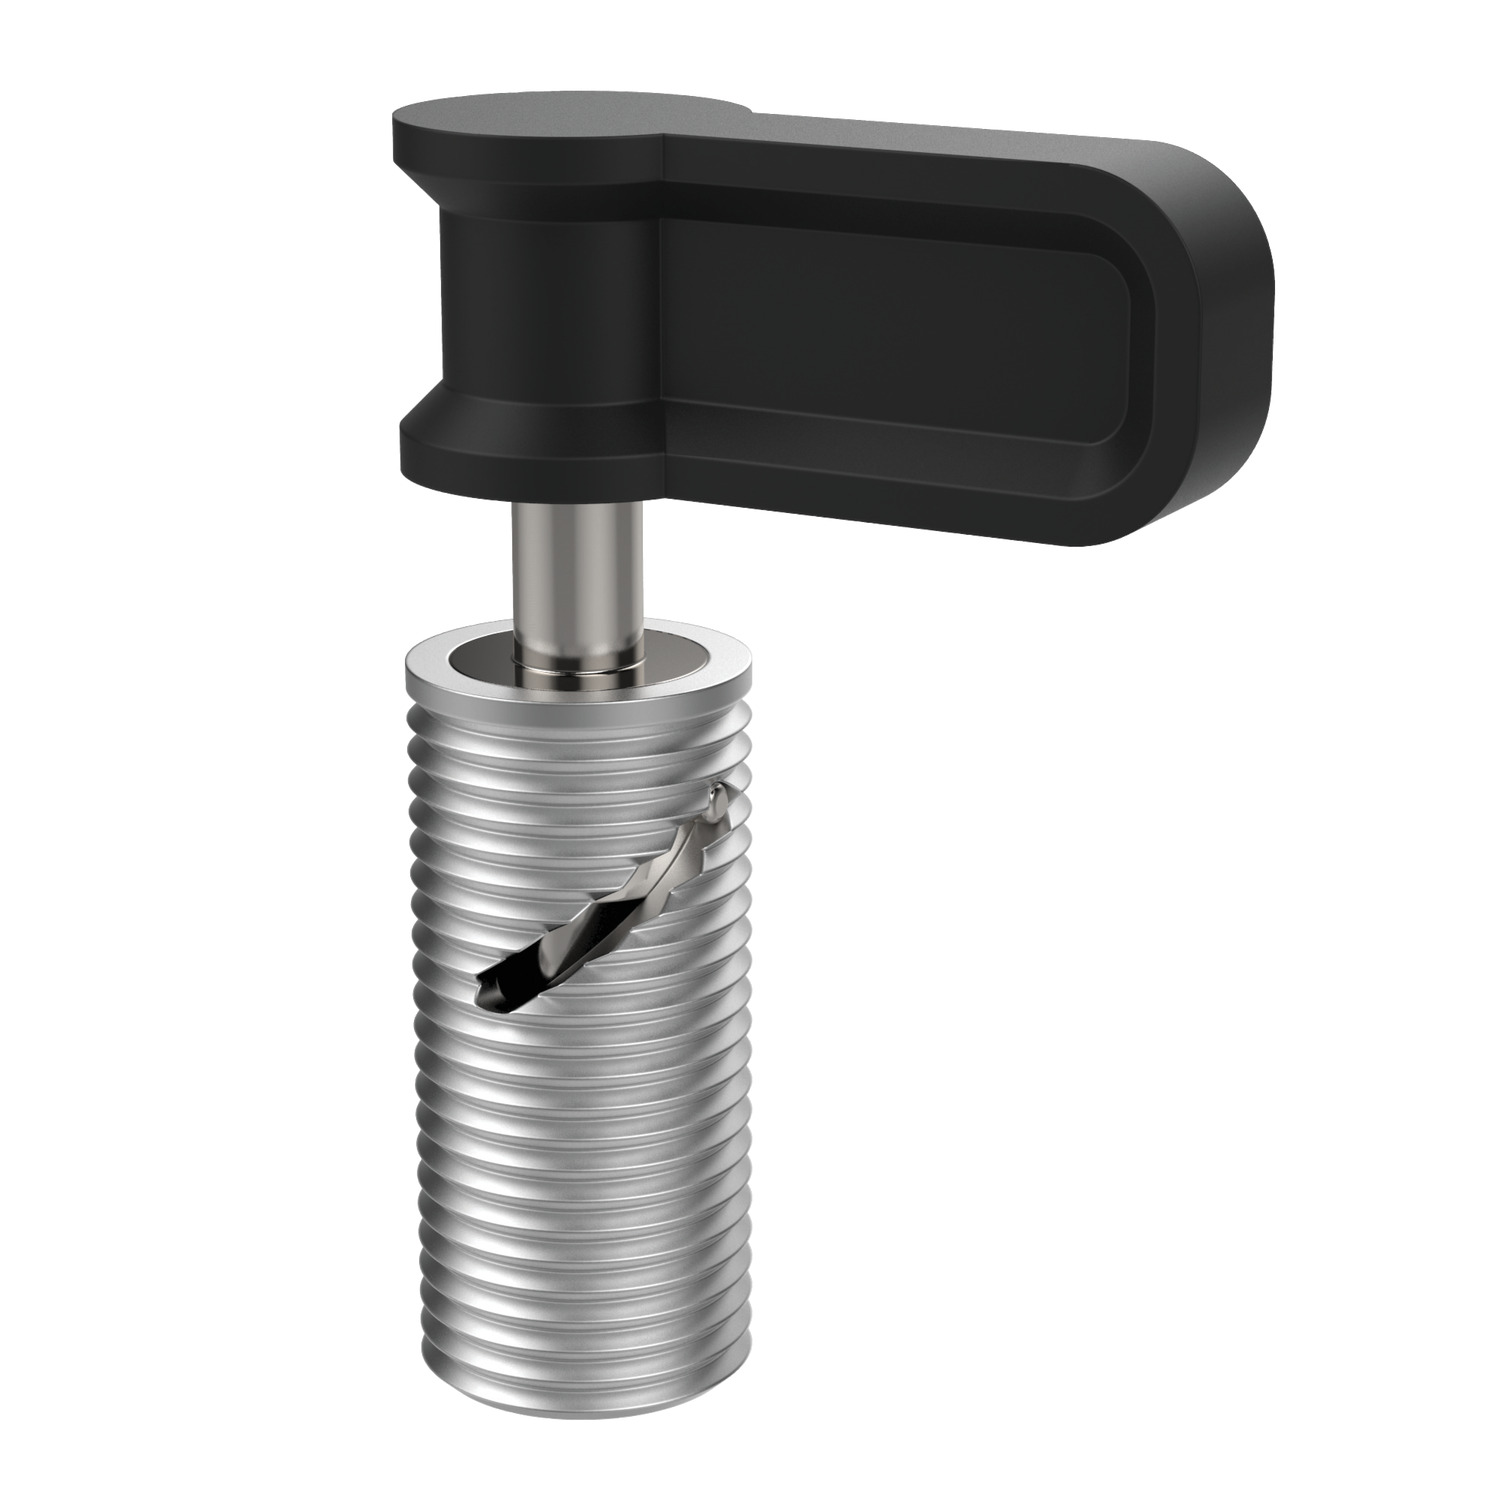 Index Plungers - Lever Grip Lever grip index plungers. At start position locking pin is retracted, when lever is actuated locking pin protrudes. Available without rest position, with rest position and with a safety rest position.